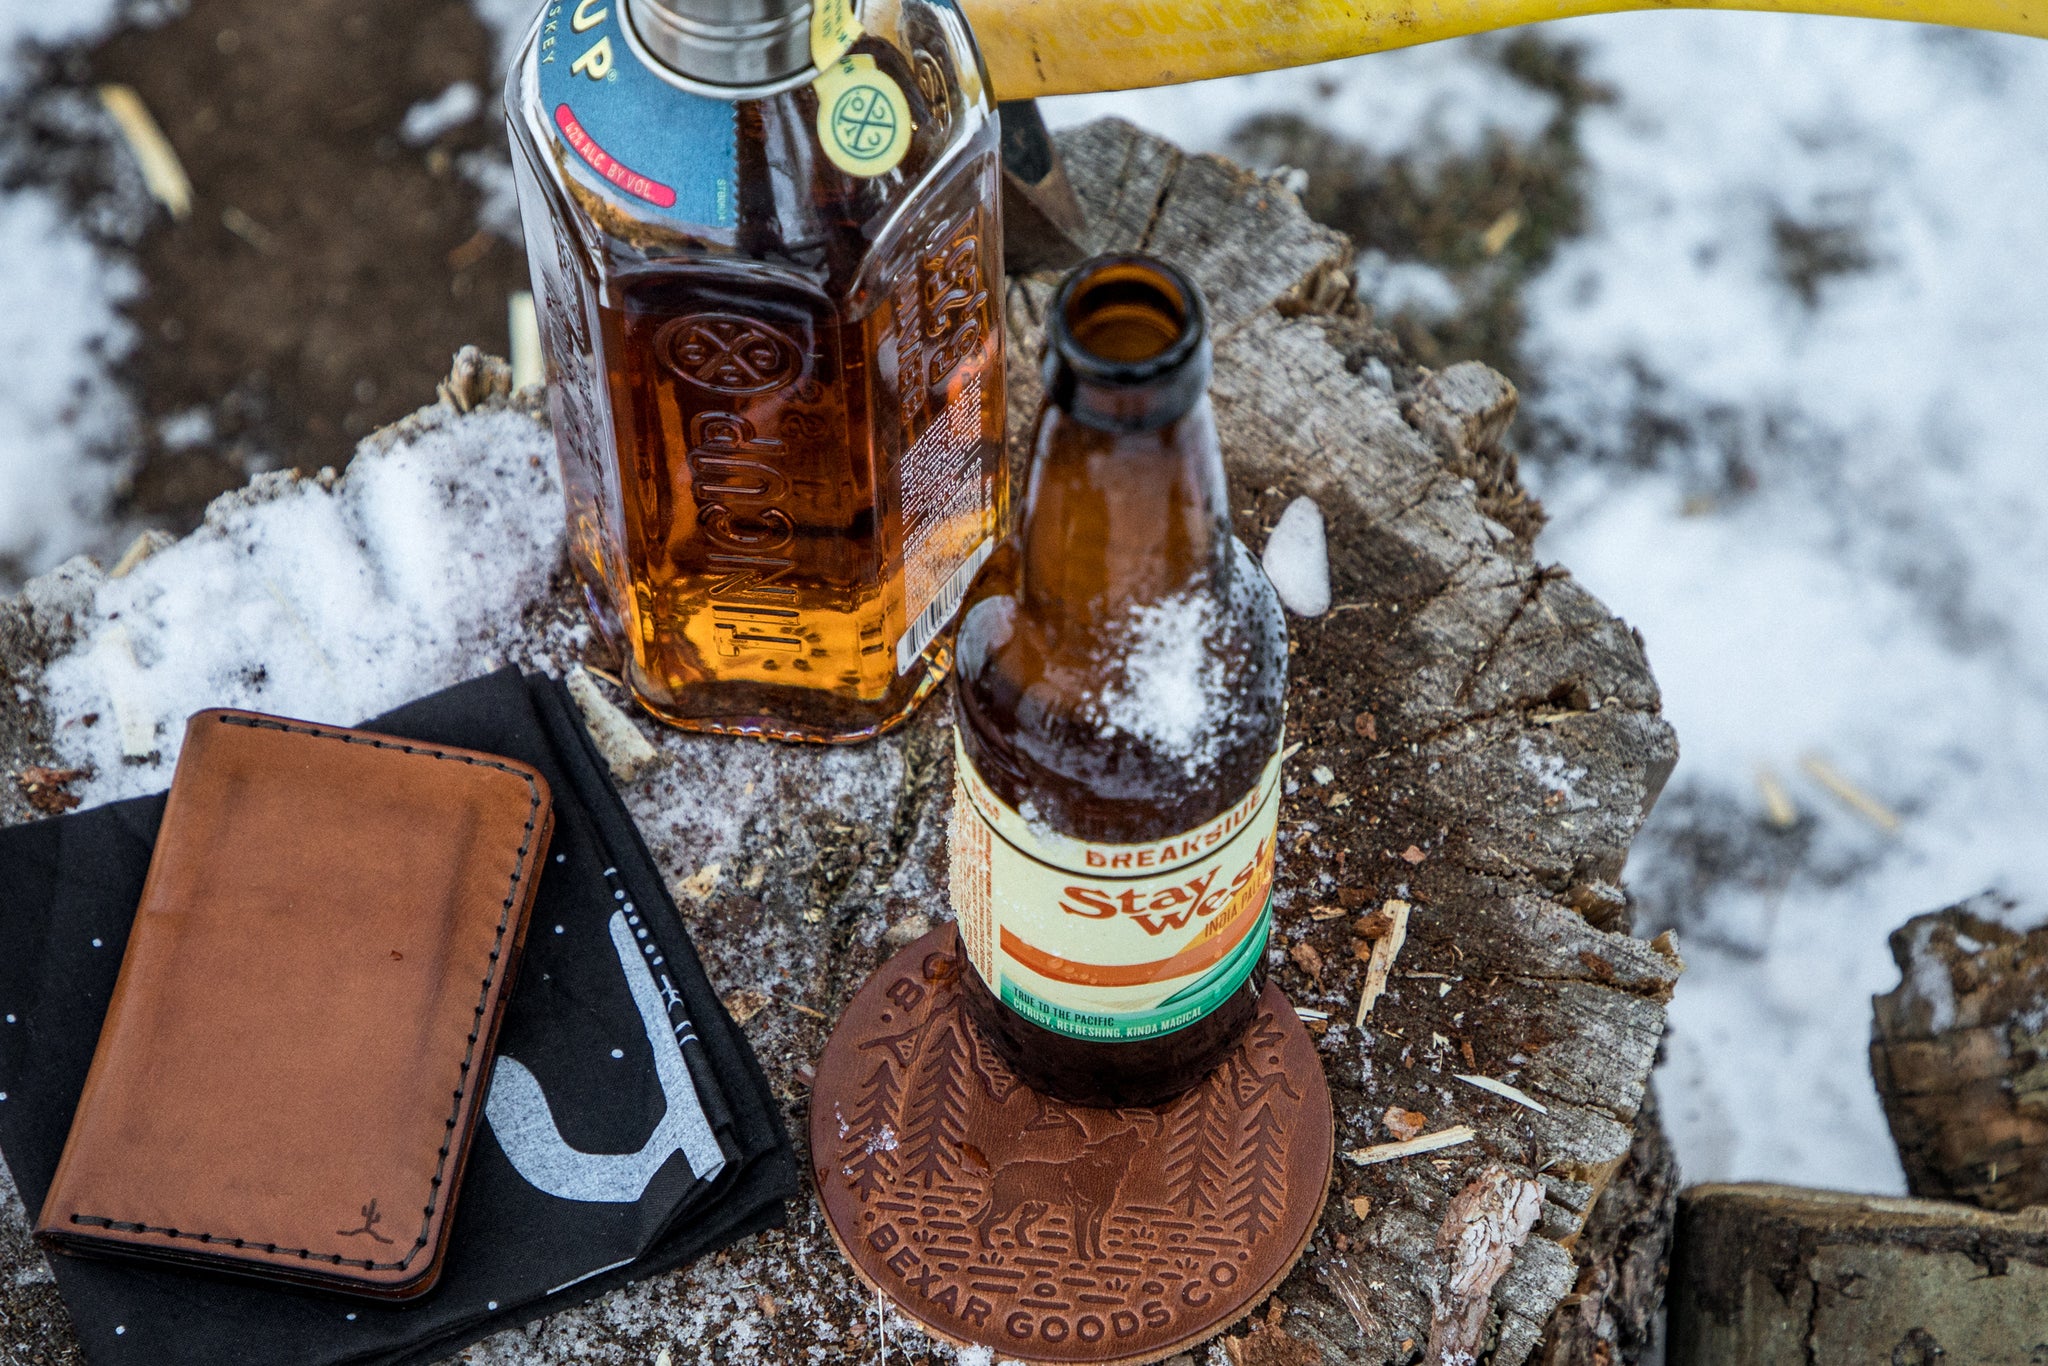 A cold and snowy stump with a Black Bandana, Bexar goods wallet, Whiskey Bottle , Beer bottle and leather coaster sit on top of tree stump